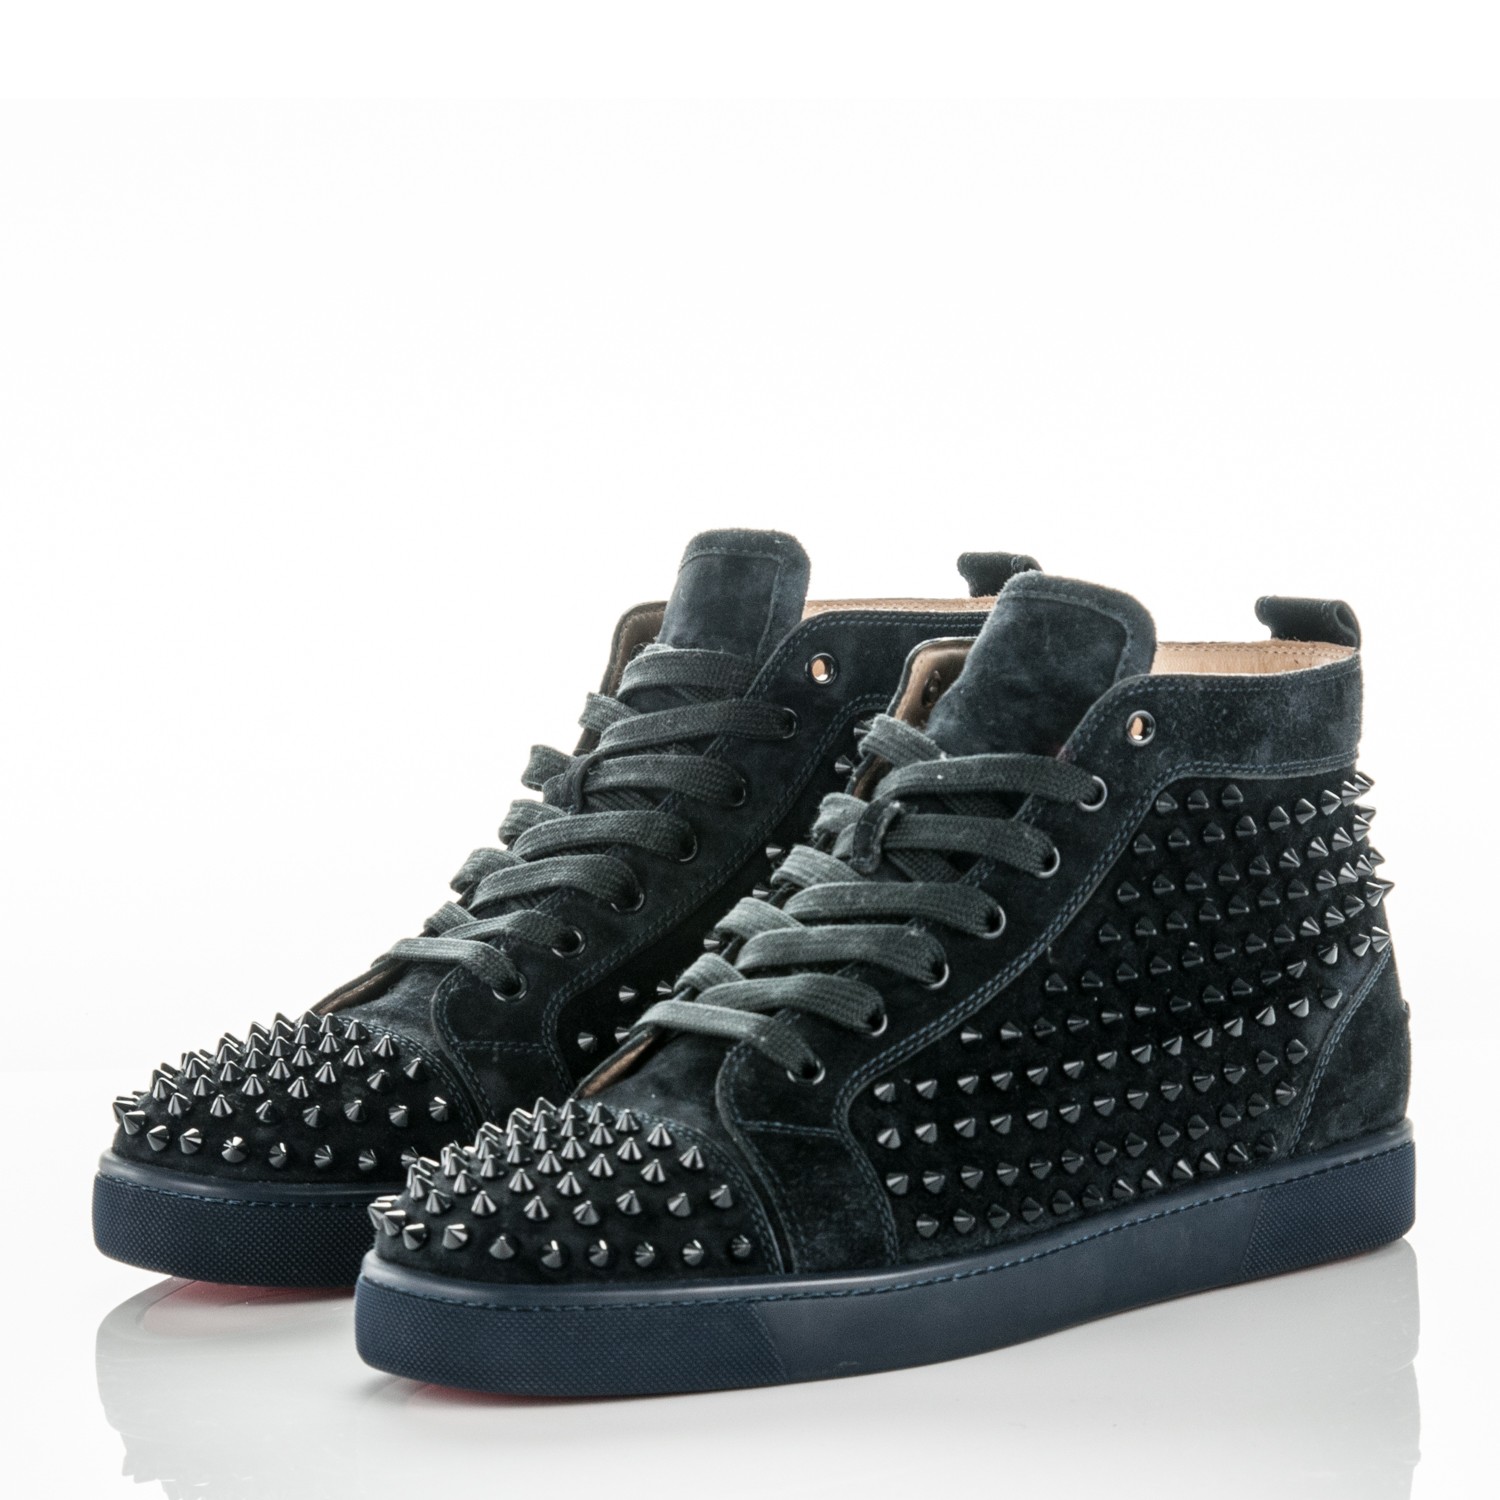 louboutin grey suede spikes